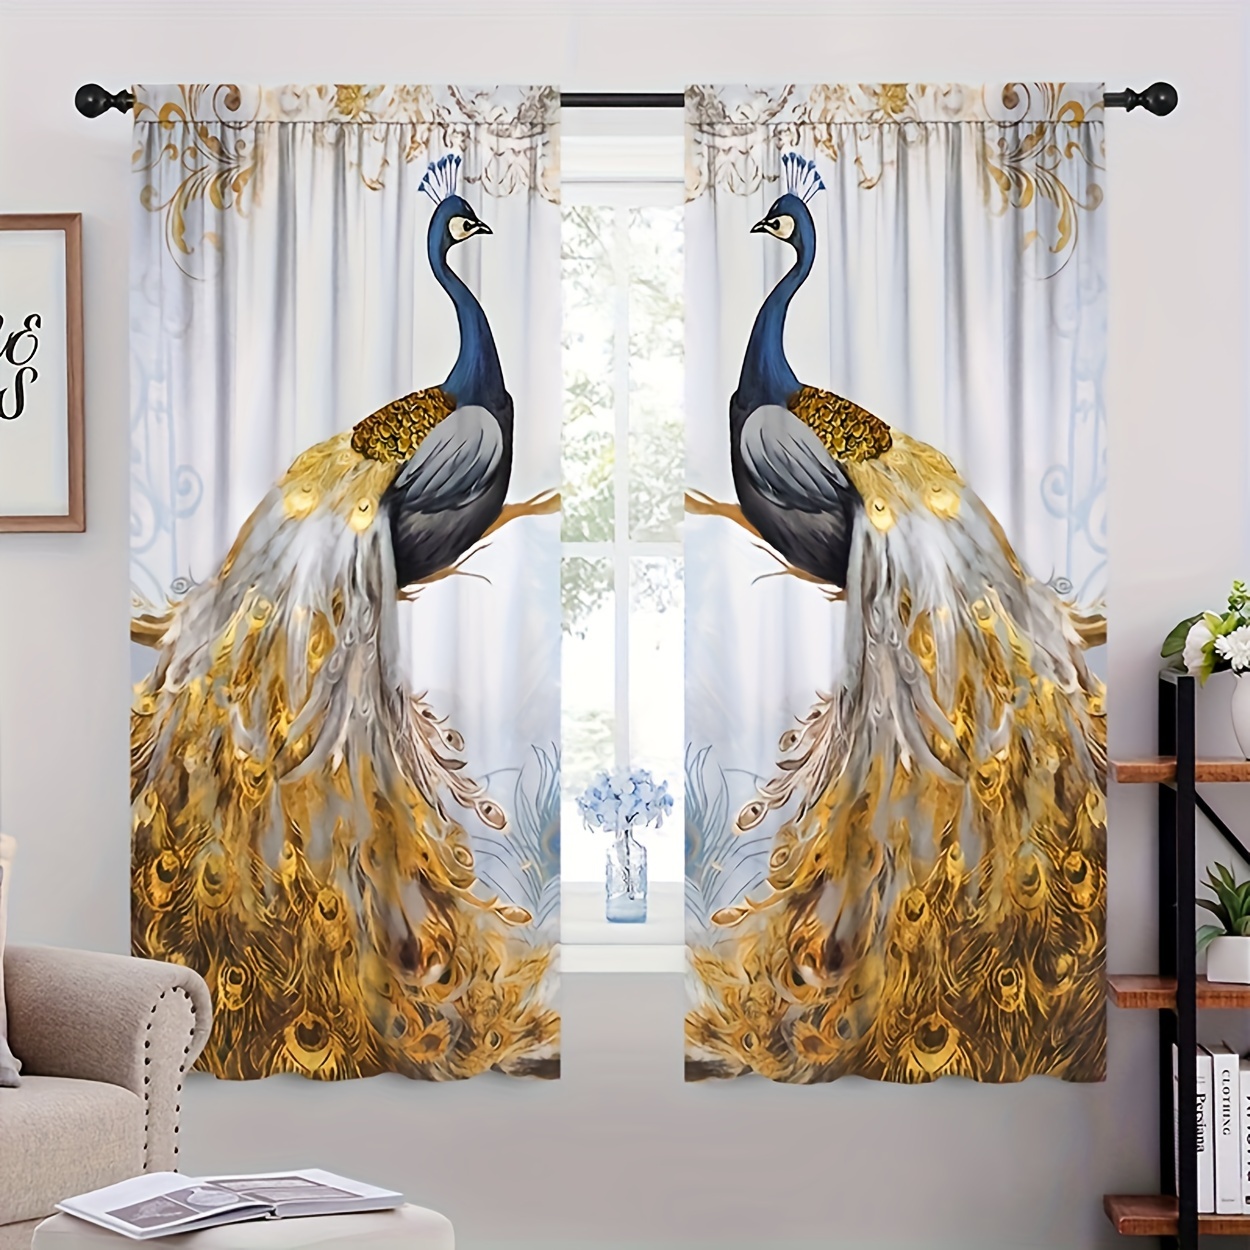 

2pcs Golden Peacock Polyester Light Filtering Curtains, Suitable For Window Rod Pocket Treatment, Bedroom Living Room Study Home Decoration Curtains